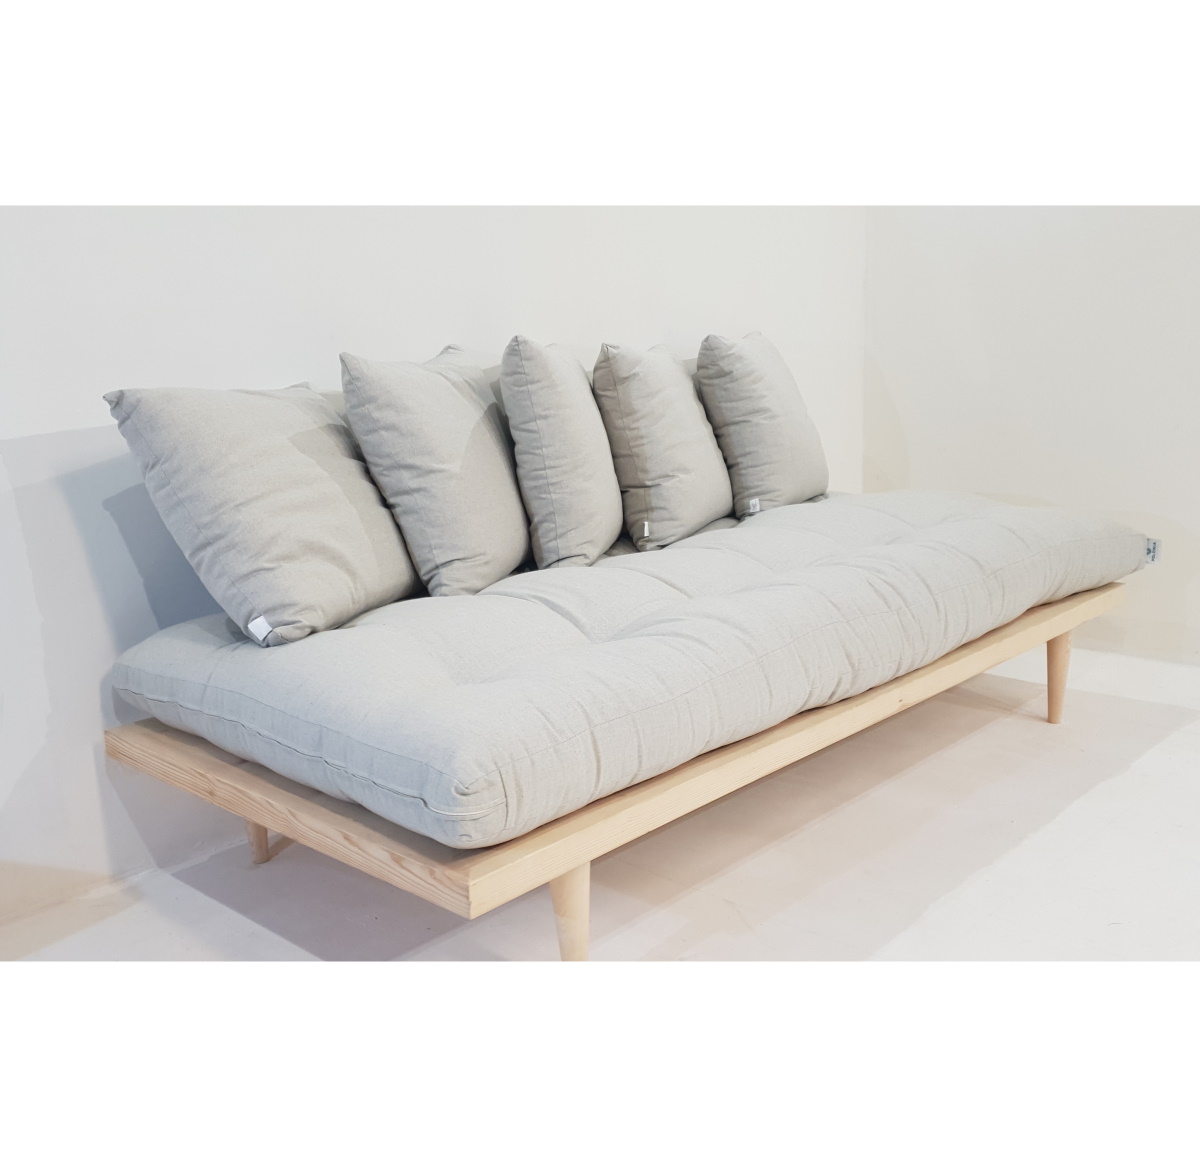 albue Mandag Oswald Styletto Day Bed from Polonia Natural Design | Sofa Bed Expert